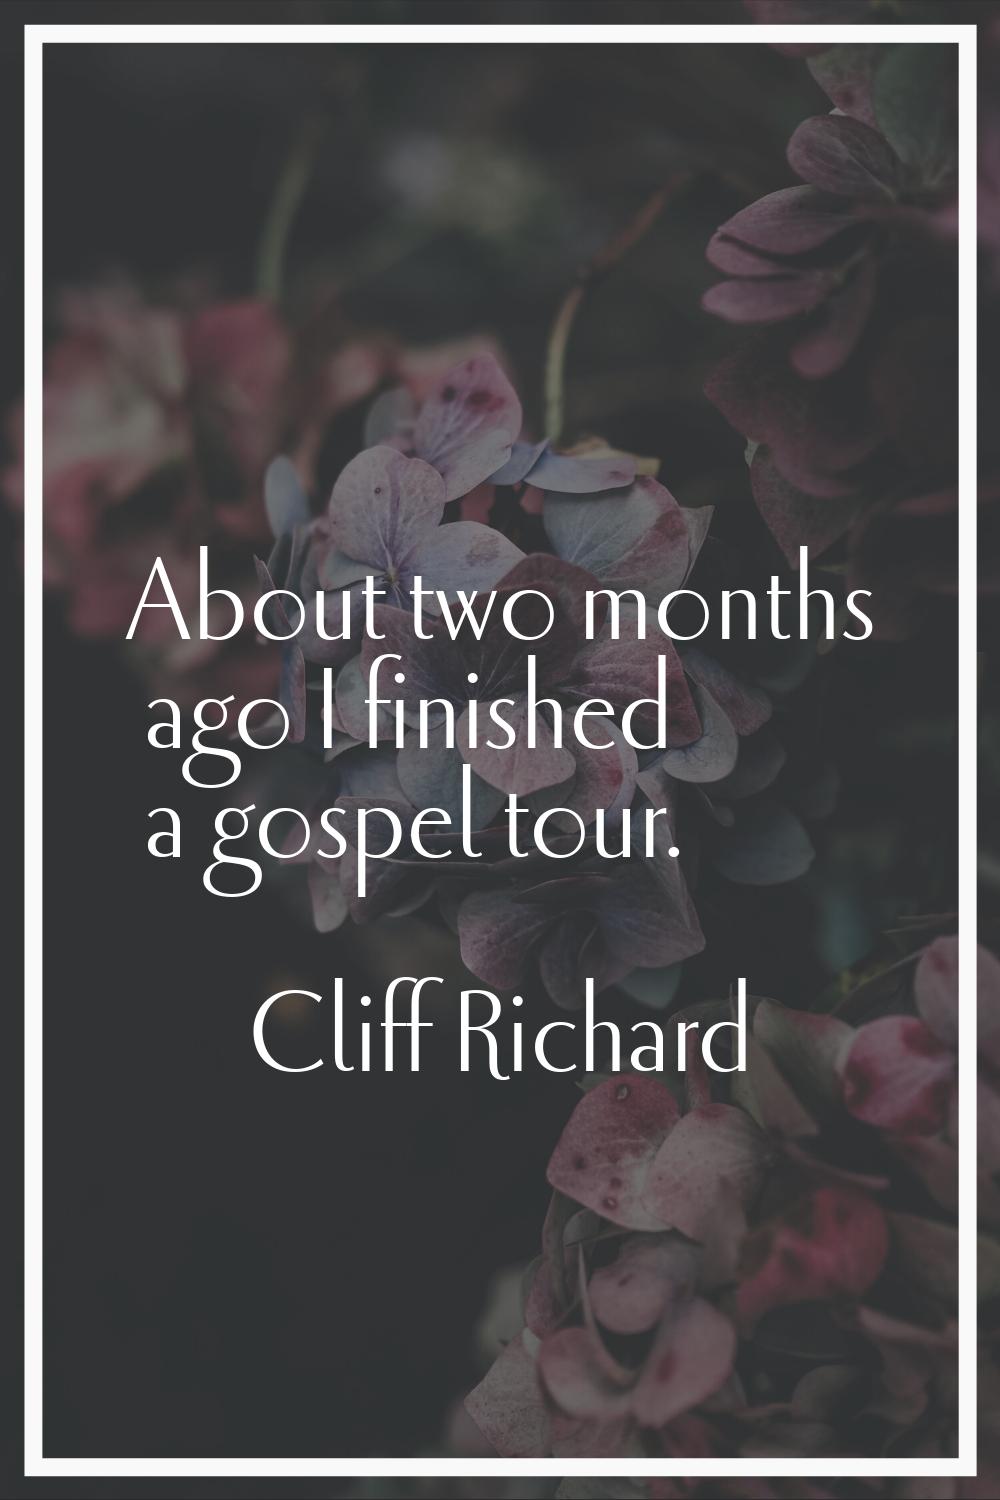 About two months ago I finished a gospel tour.